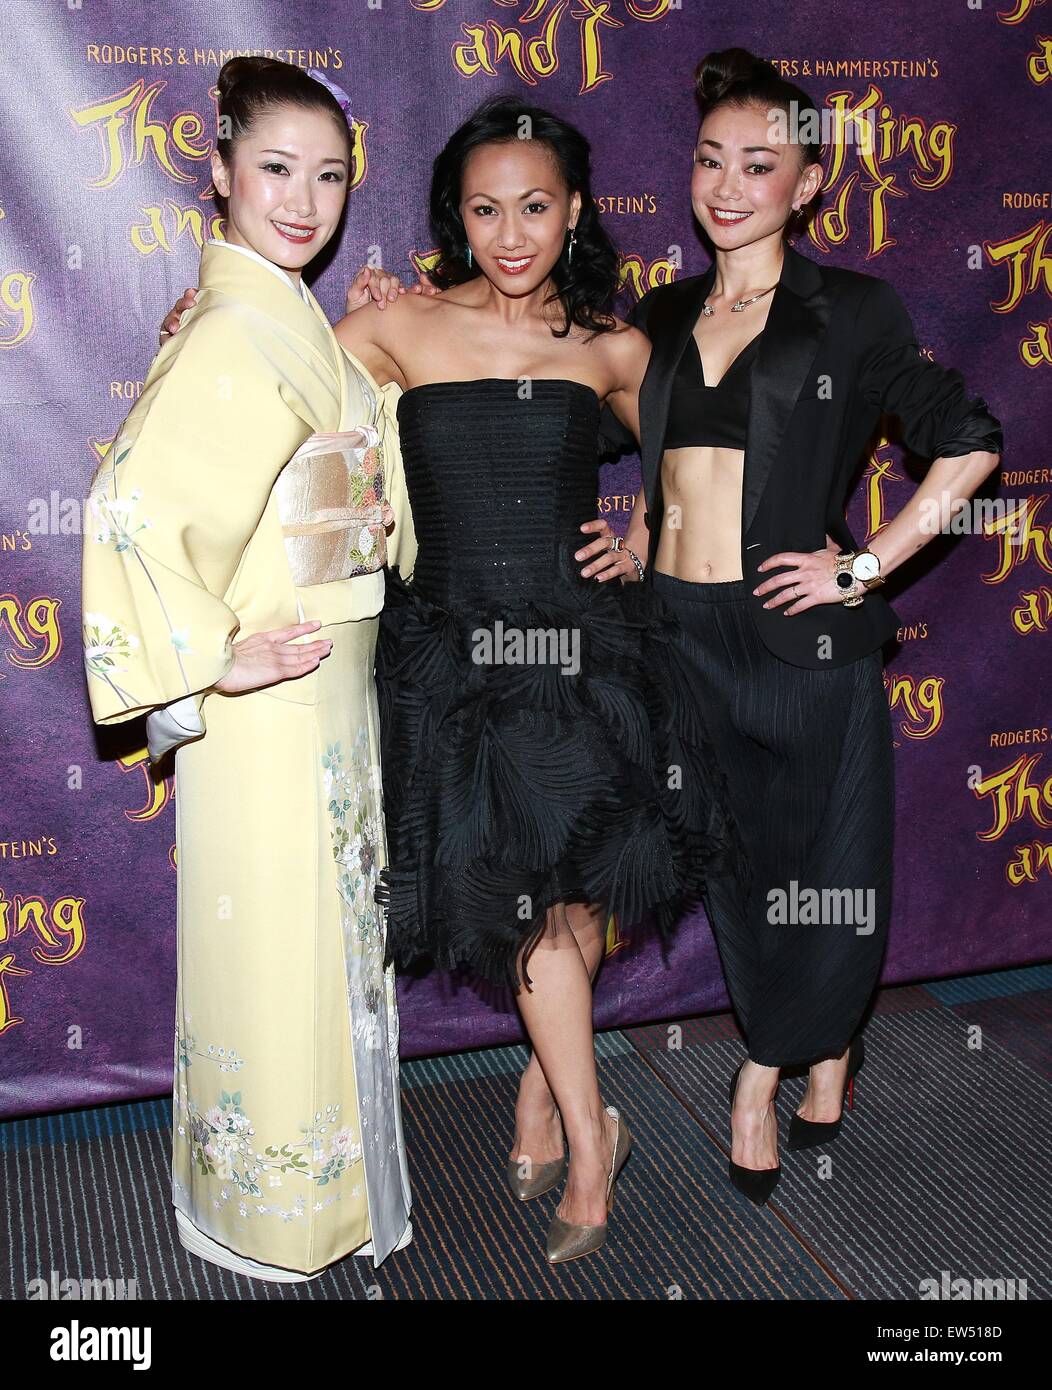 Opening night after party for The King and I at the Vivian Beaumont Theatre - Arrivals.  Featuring: Yuki Ozeki, LaMae Caparas, Sumie Maeda Where: New York City, New York, United States When: 17 Apr 2015 C Stock Photo